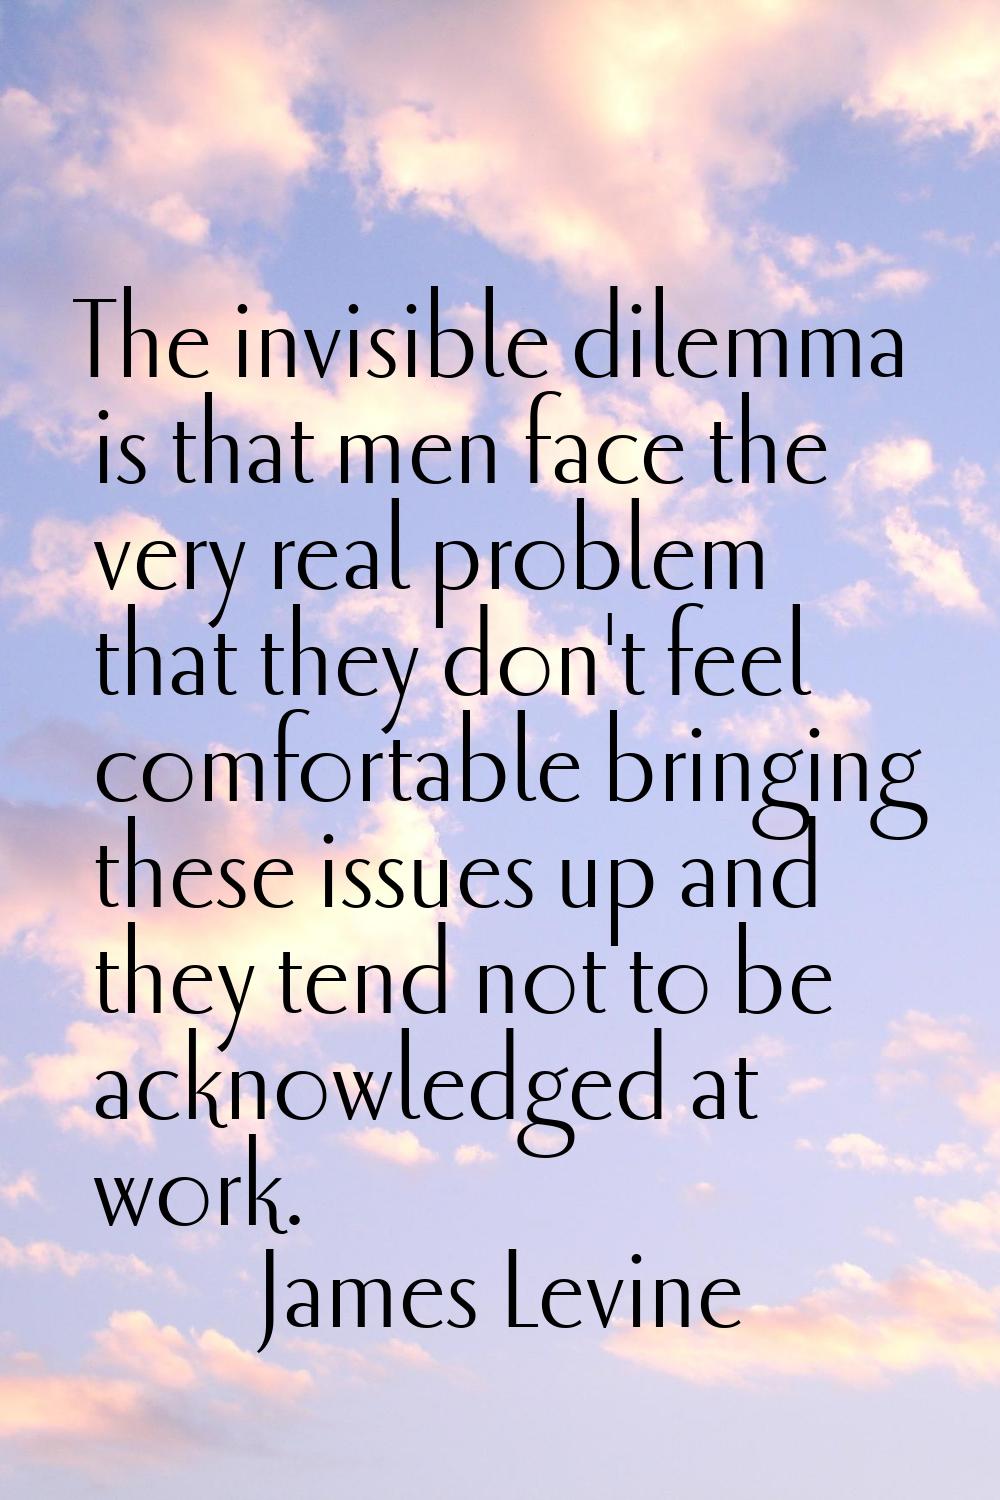 The invisible dilemma is that men face the very real problem that they don't feel comfortable bring